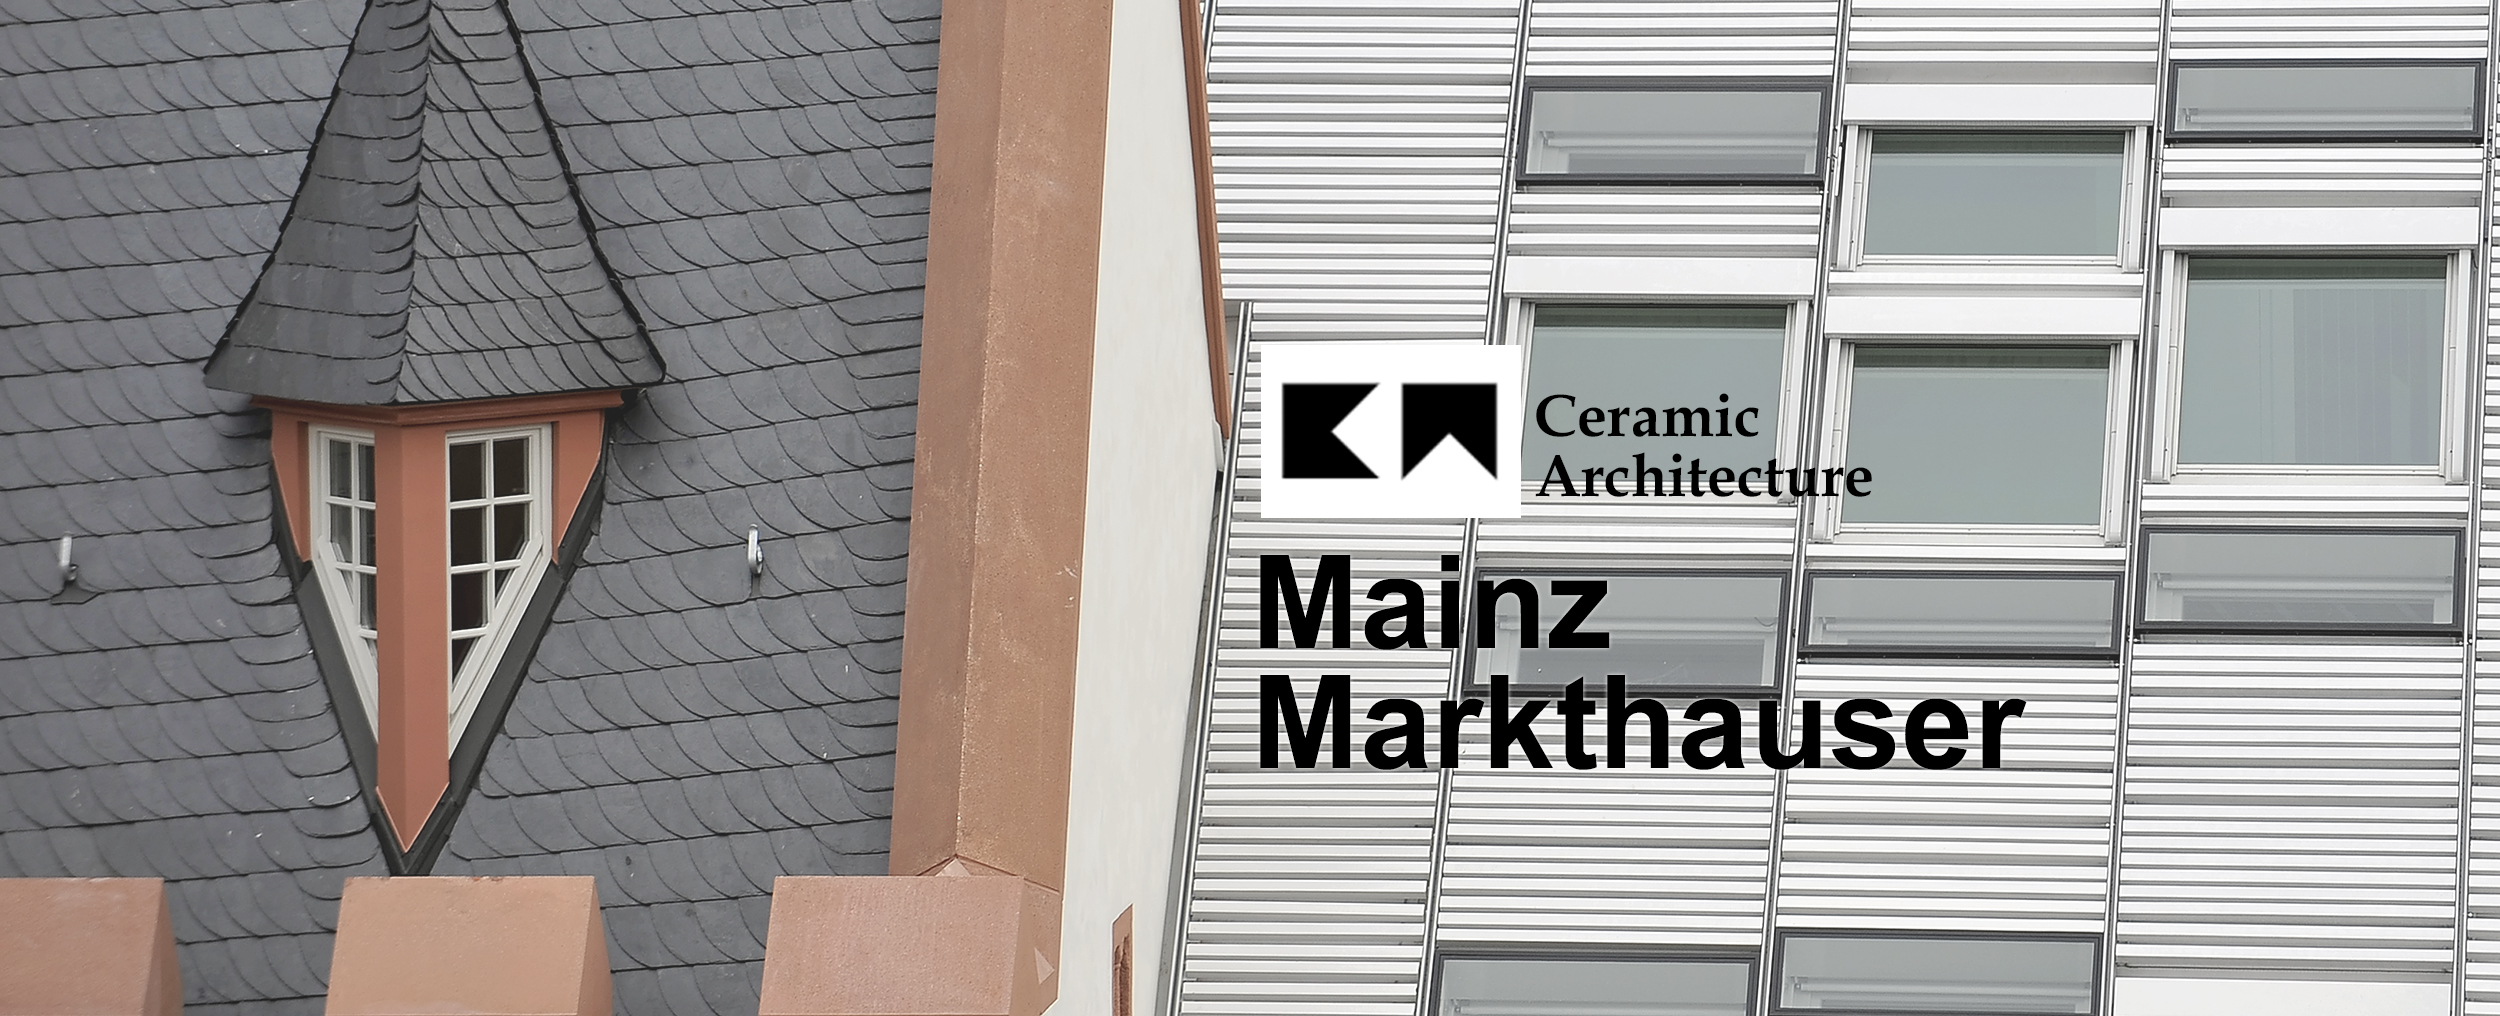 Mainz Markthäuser Complex published on Ceramic Architectures2020, July 30